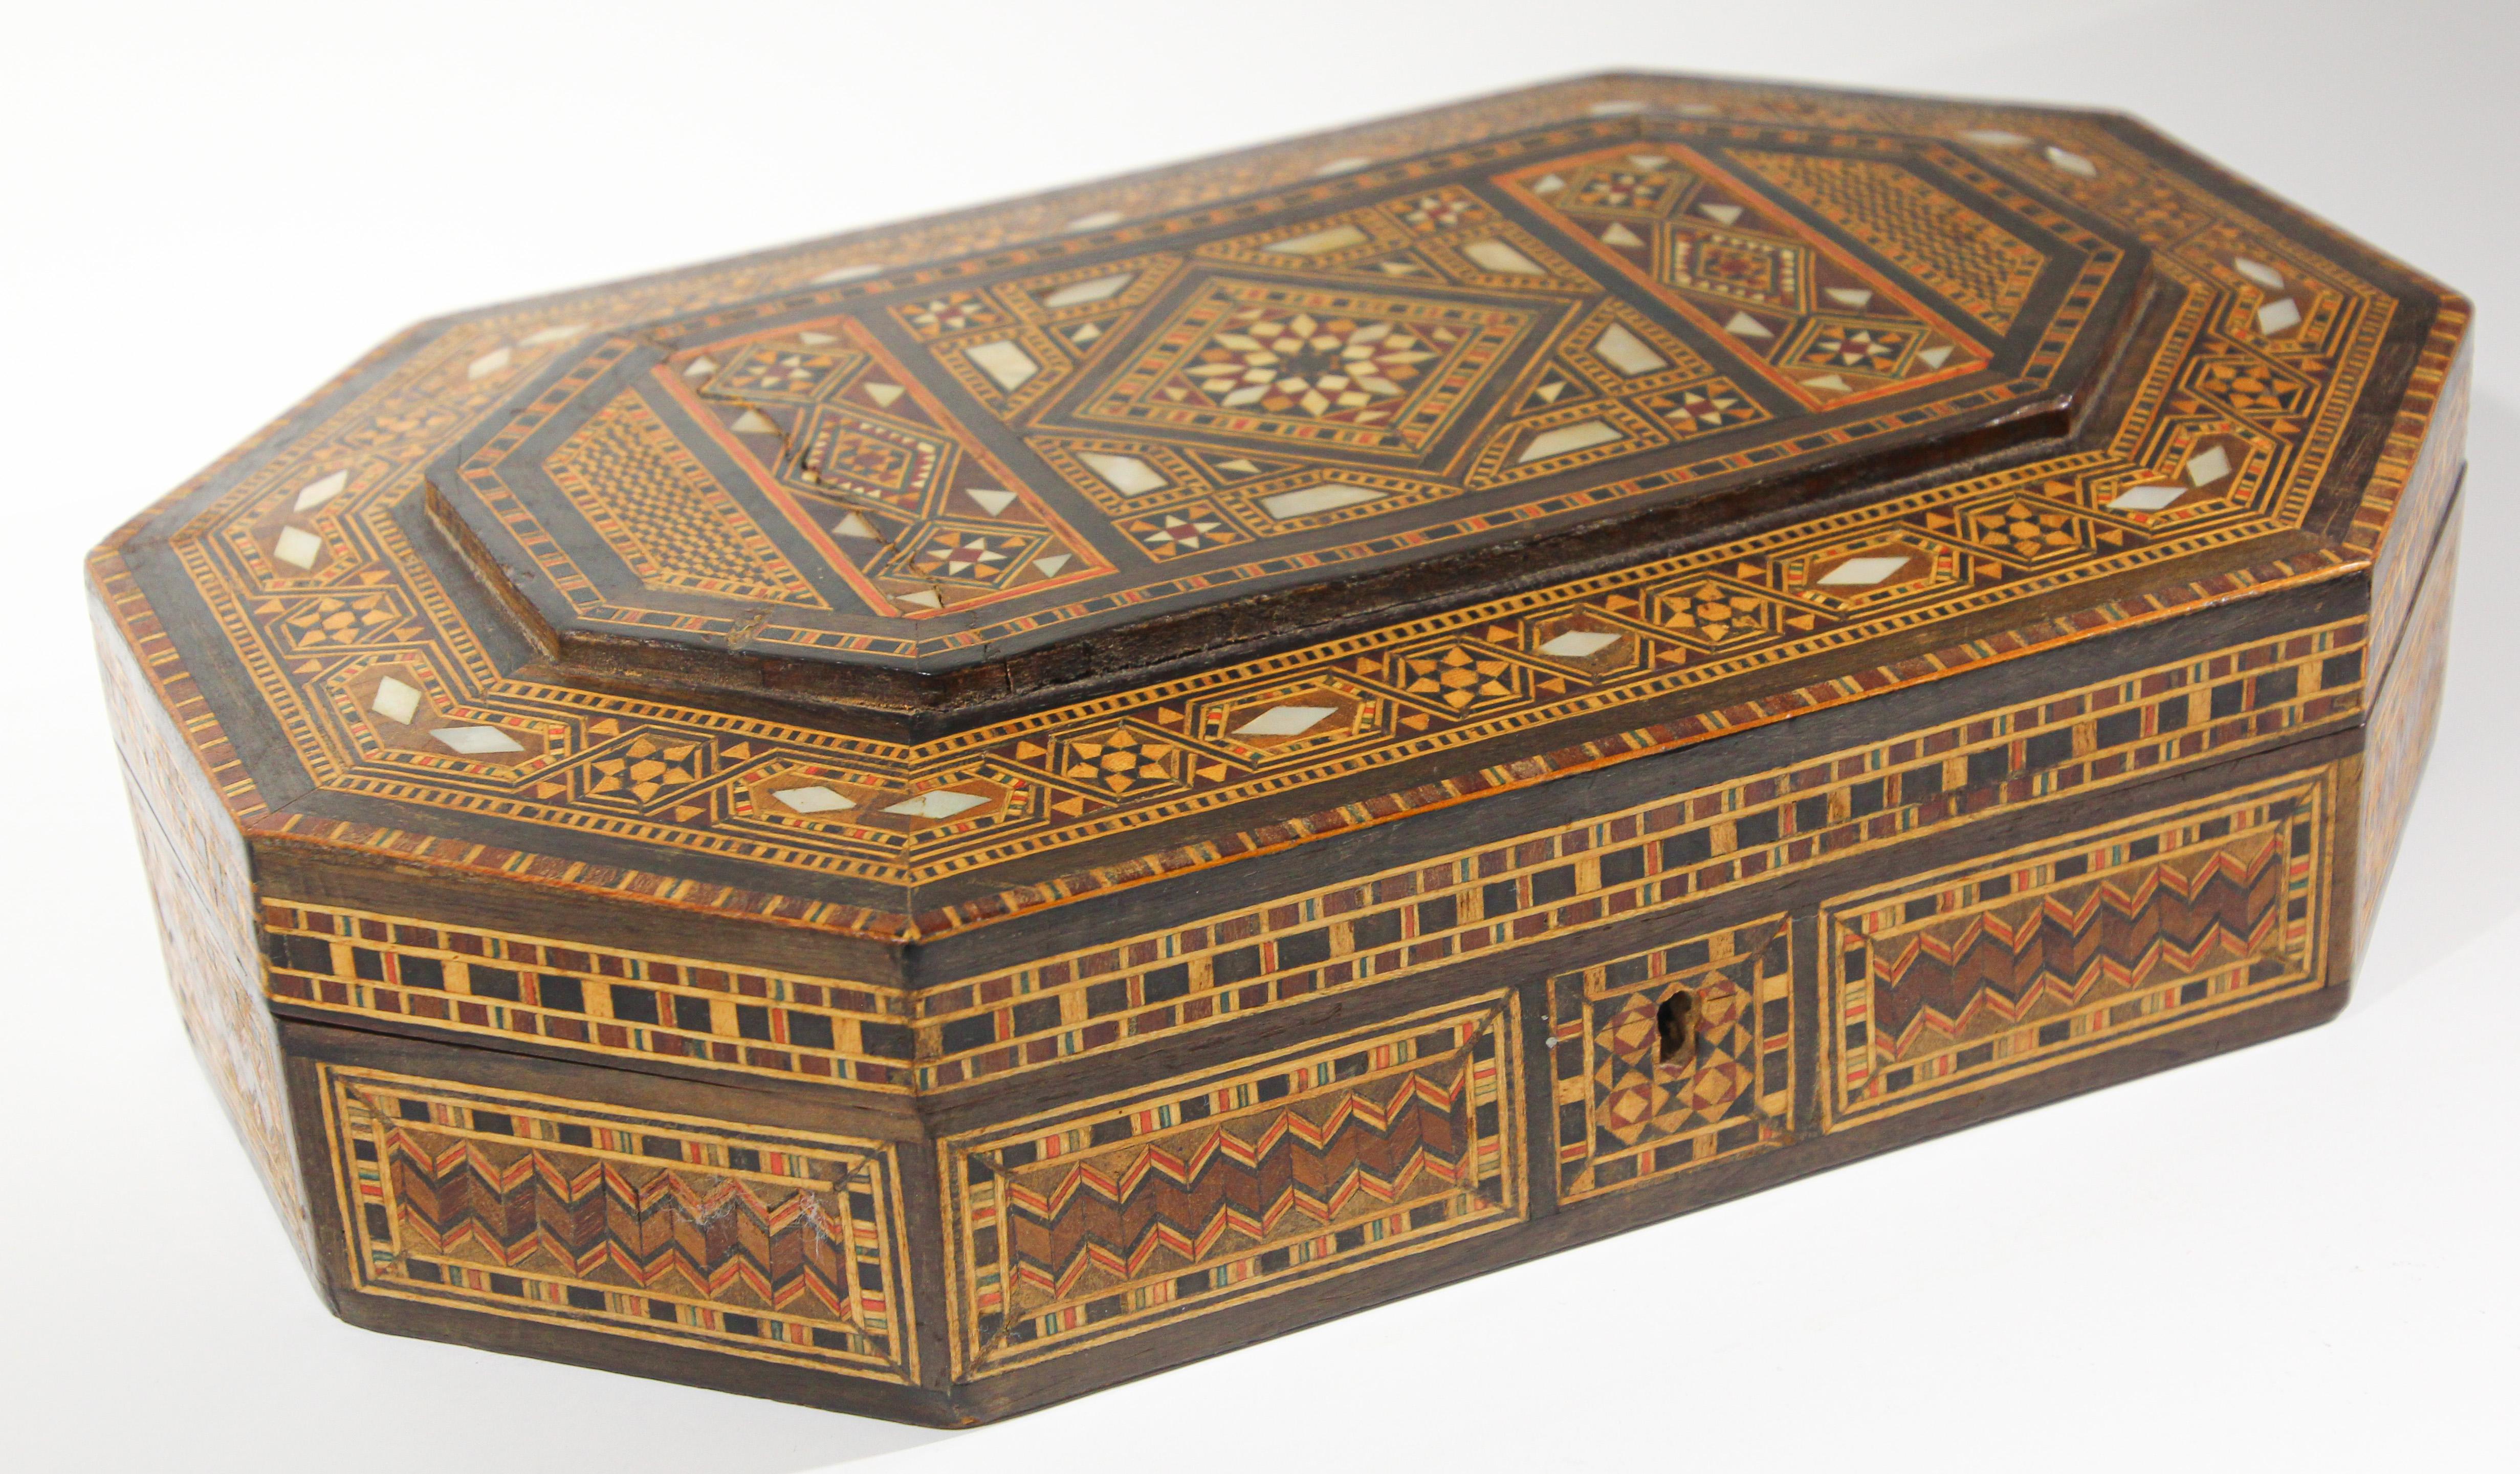 Large Middle Eastern Moorish style micro mosaic inlaid jewelry box with lid.
Intricate hexagonal shape inlaid box with geometric Moorish design.
I'm always astounded by the intricate workmanship of these boxes. The interior of the lid is also inlaid